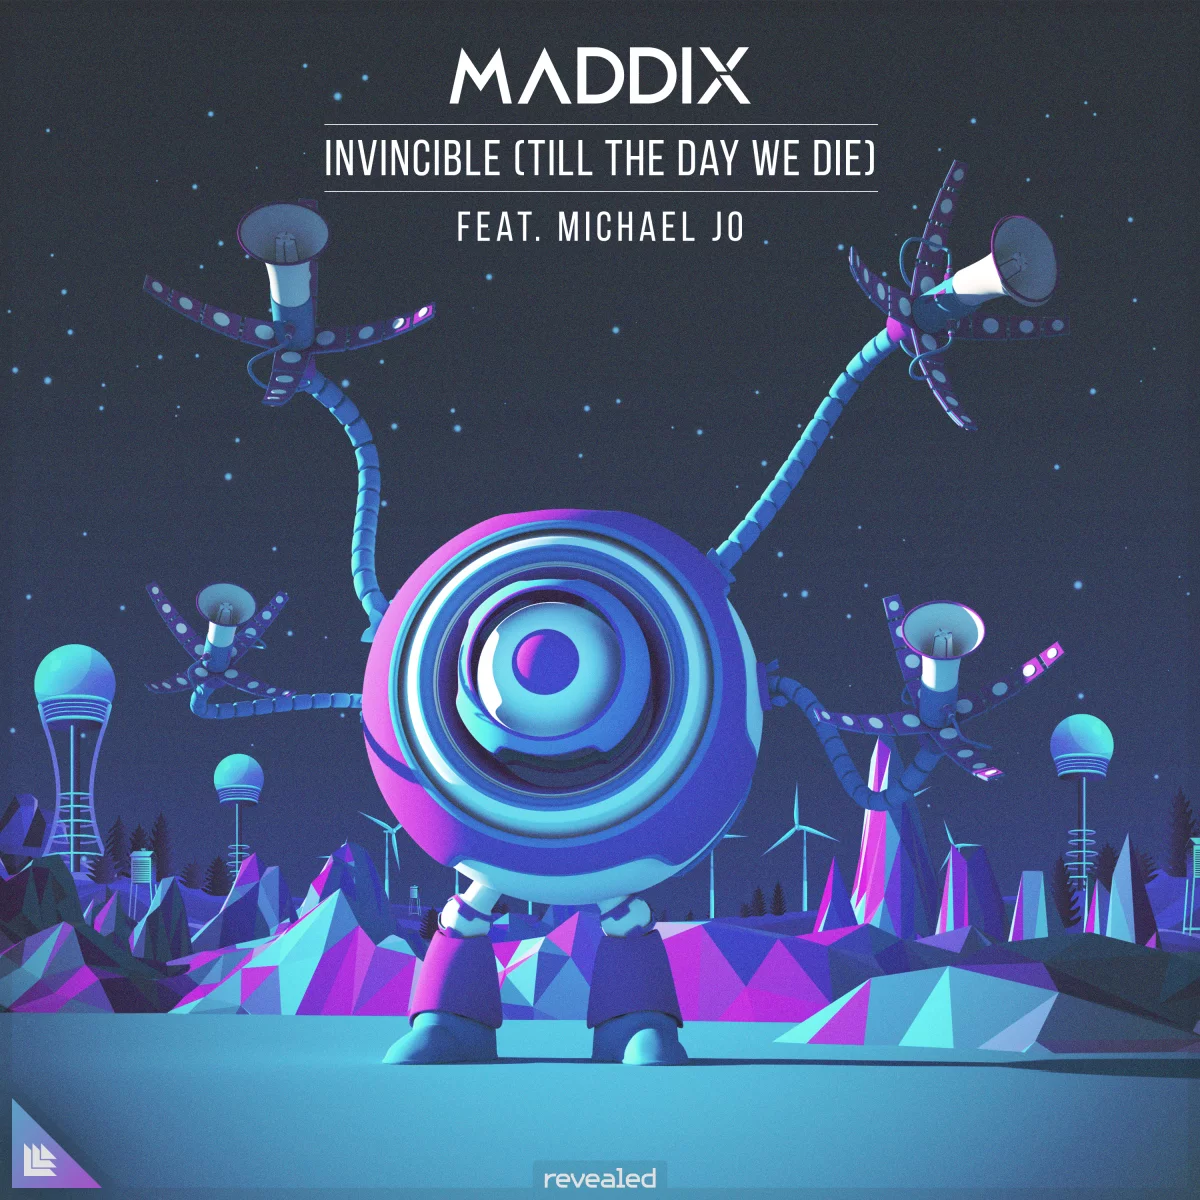 Invincible (Till The Day We Die) - Maddix feat. Michael Jo